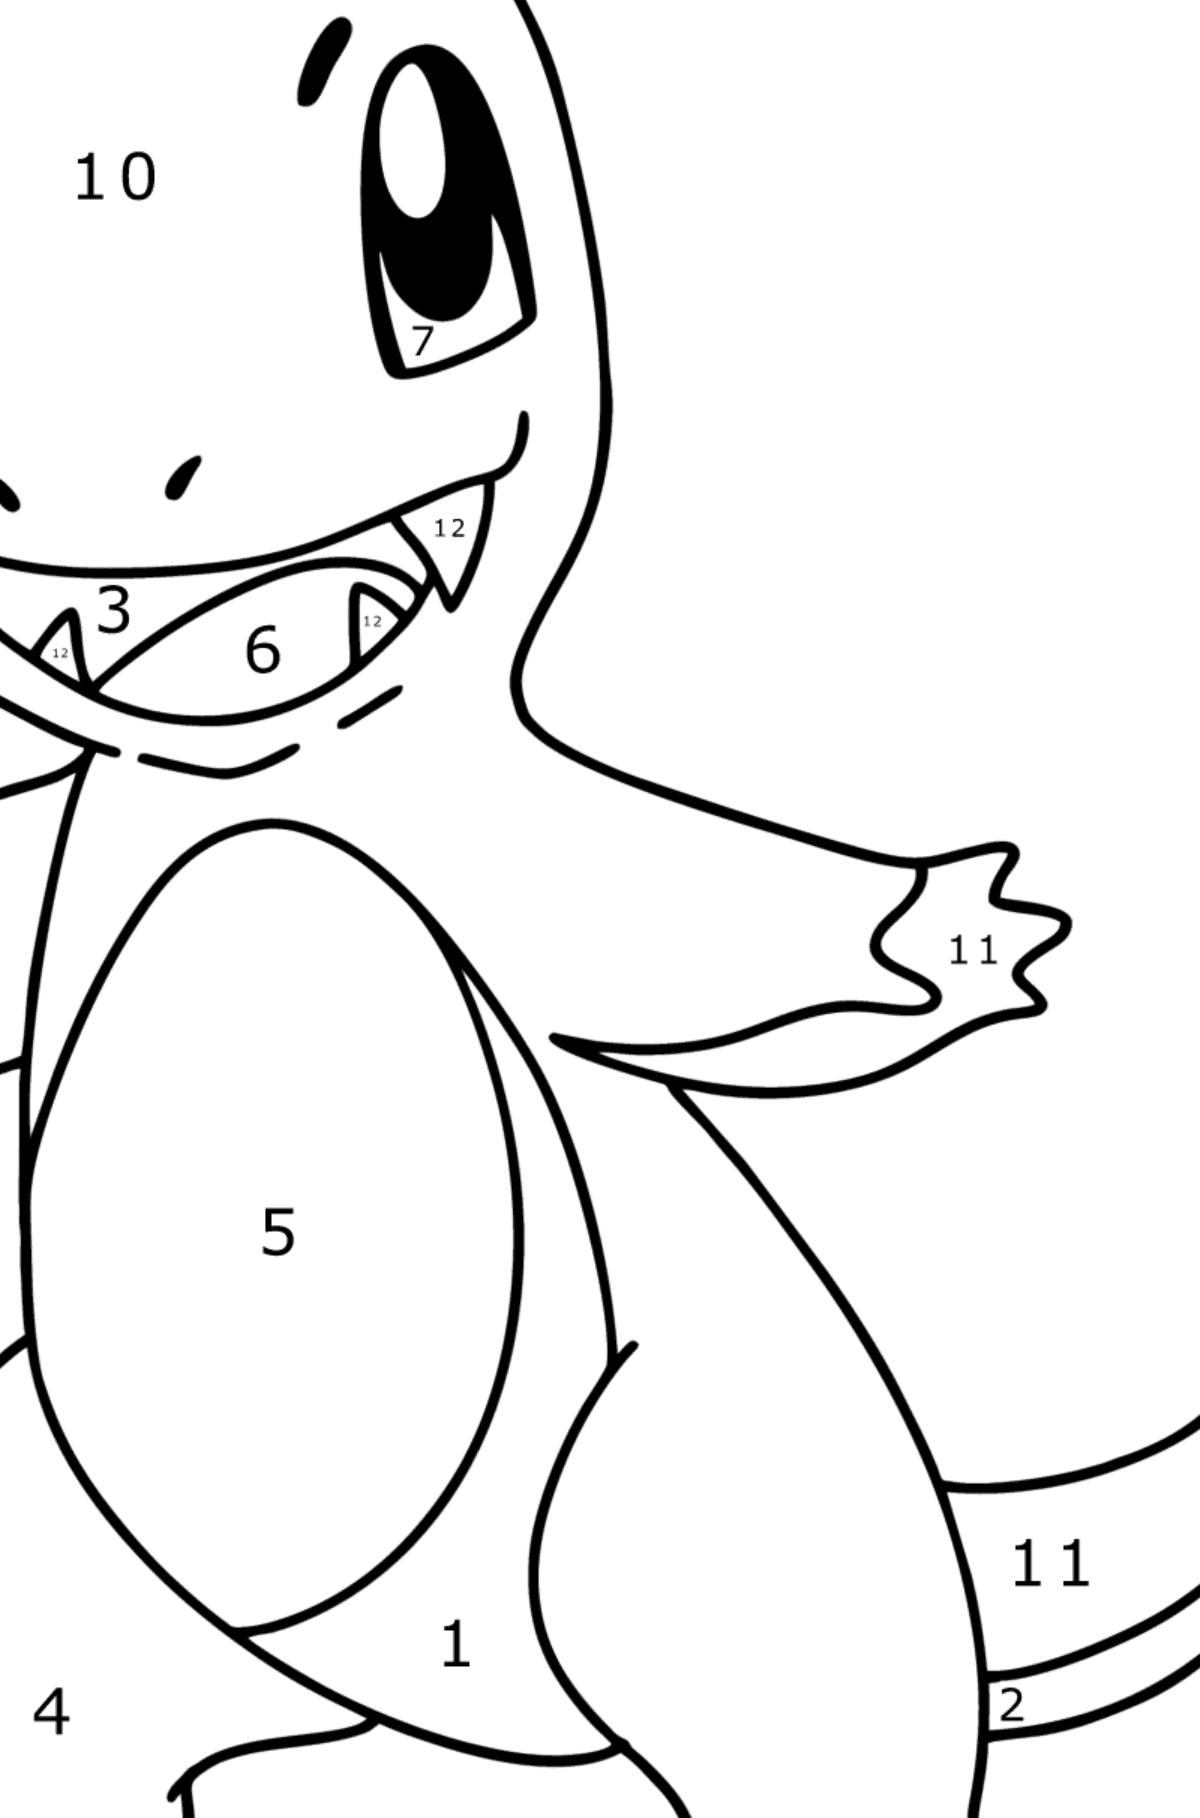 Pokémon Go Charmander coloring page - Coloring by Numbers for Kids